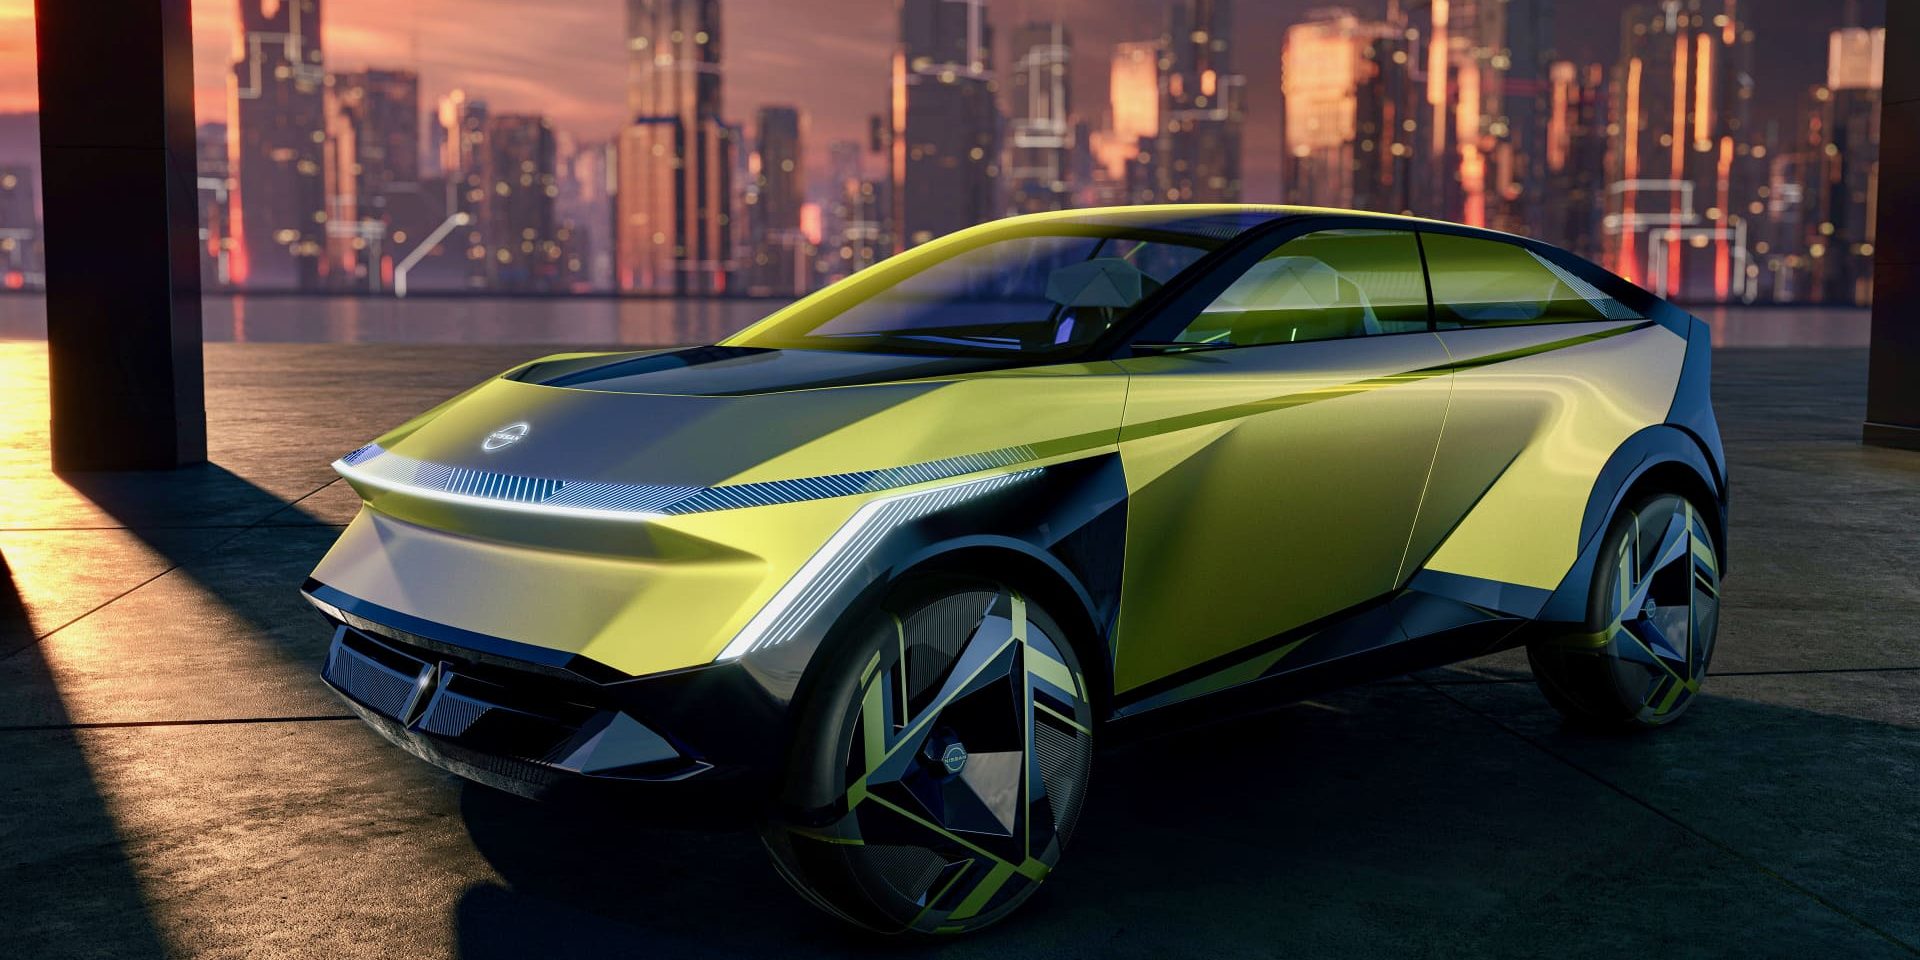 Nissan unveils the first of four electric ‘hyper’ concept cars